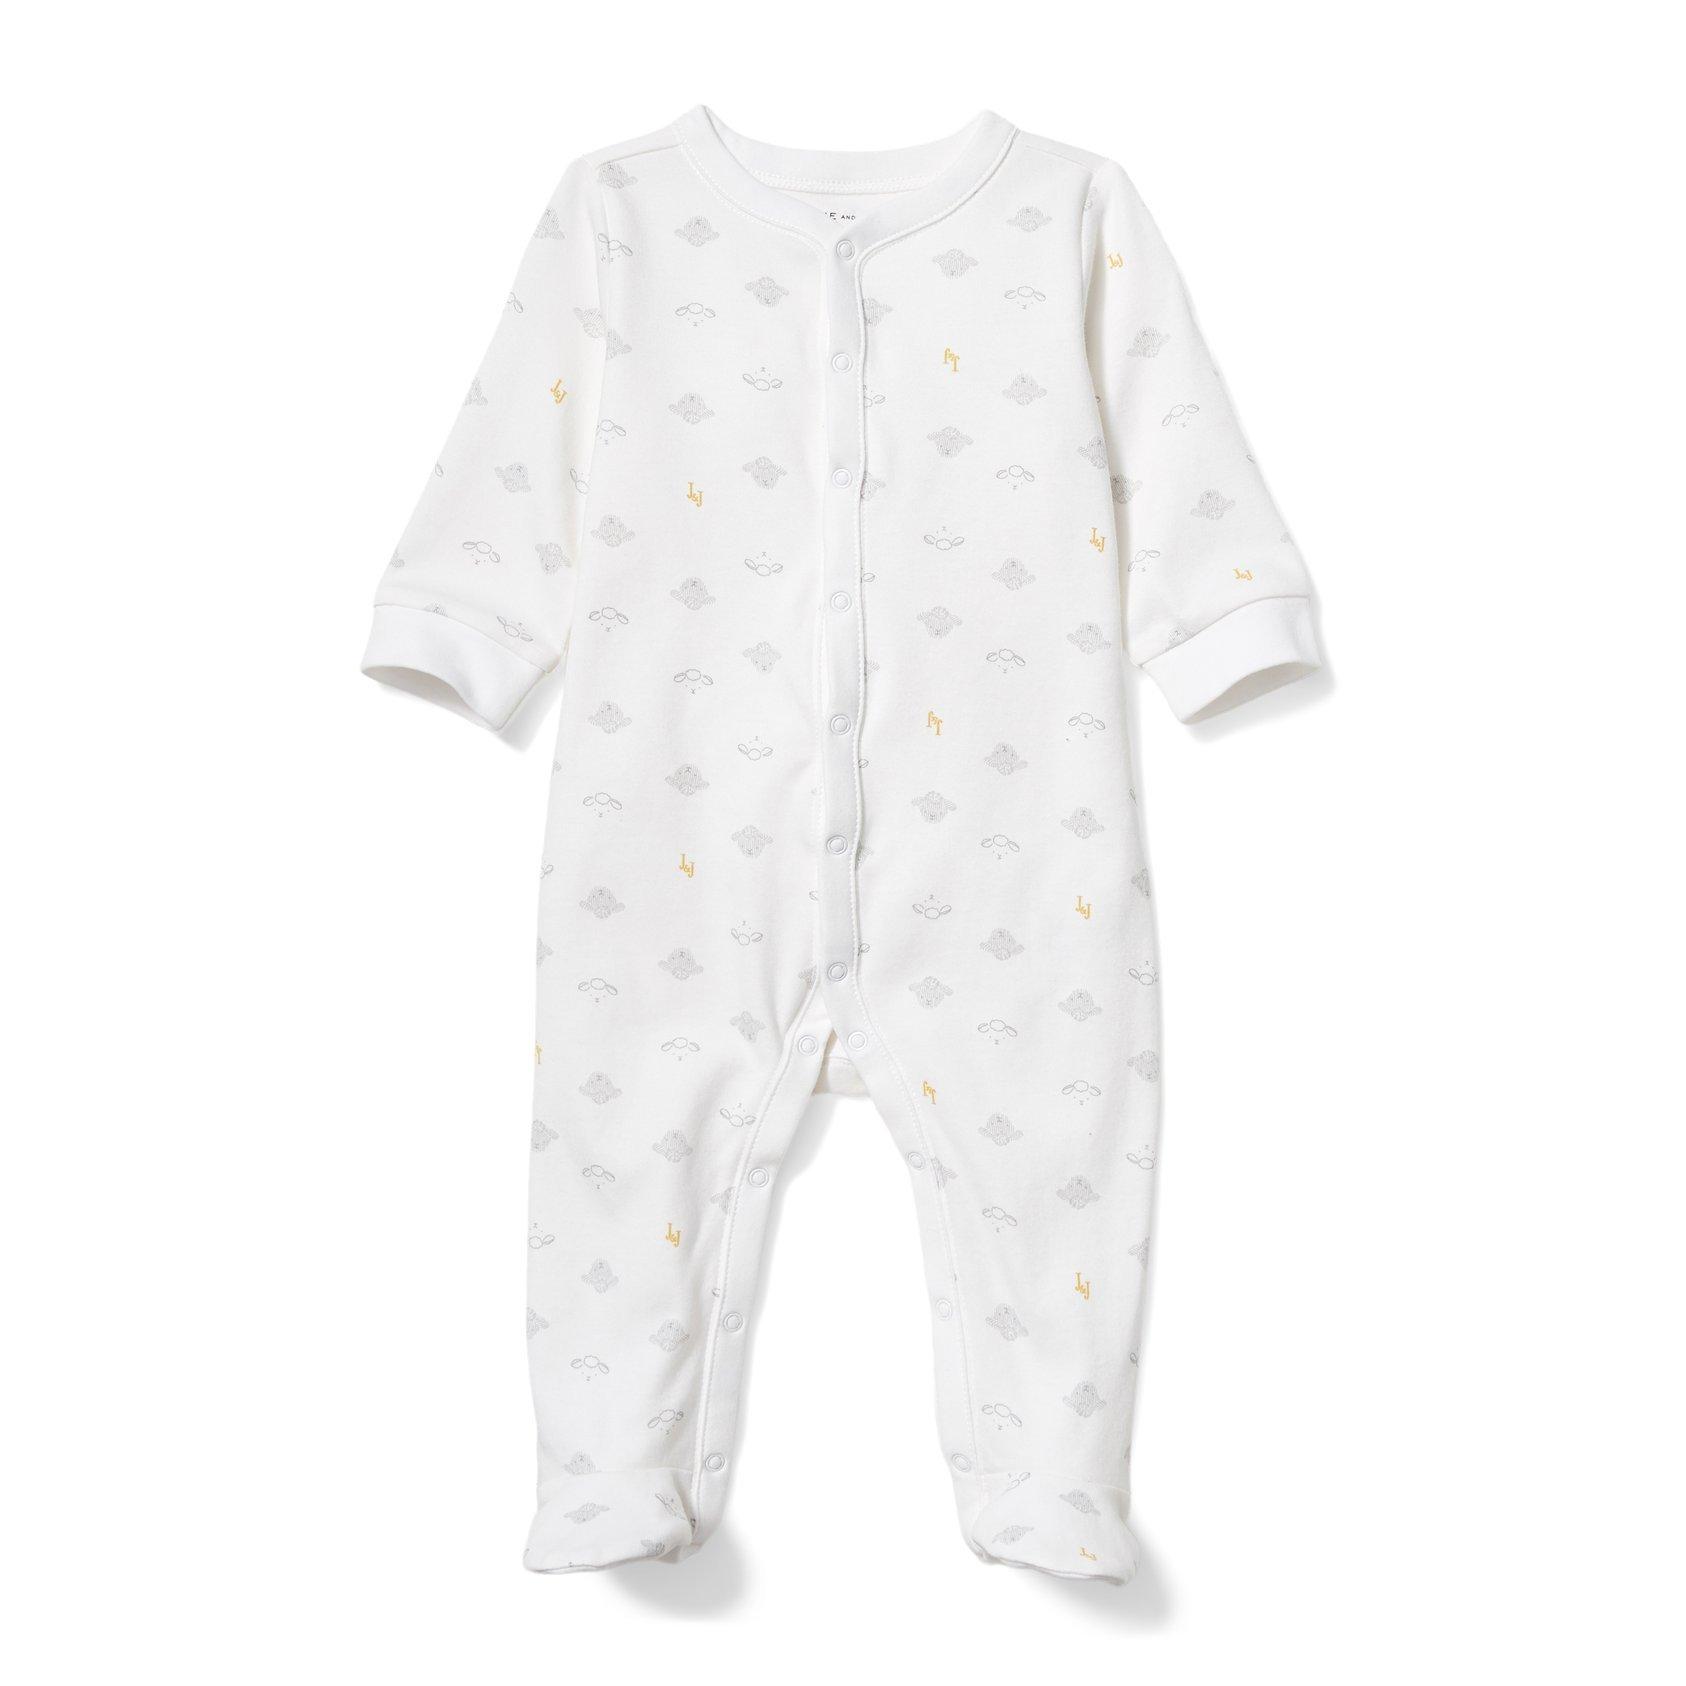 Newborn White Sheep Print Baby Sheep Footed 1-Piece by Janie and Jack